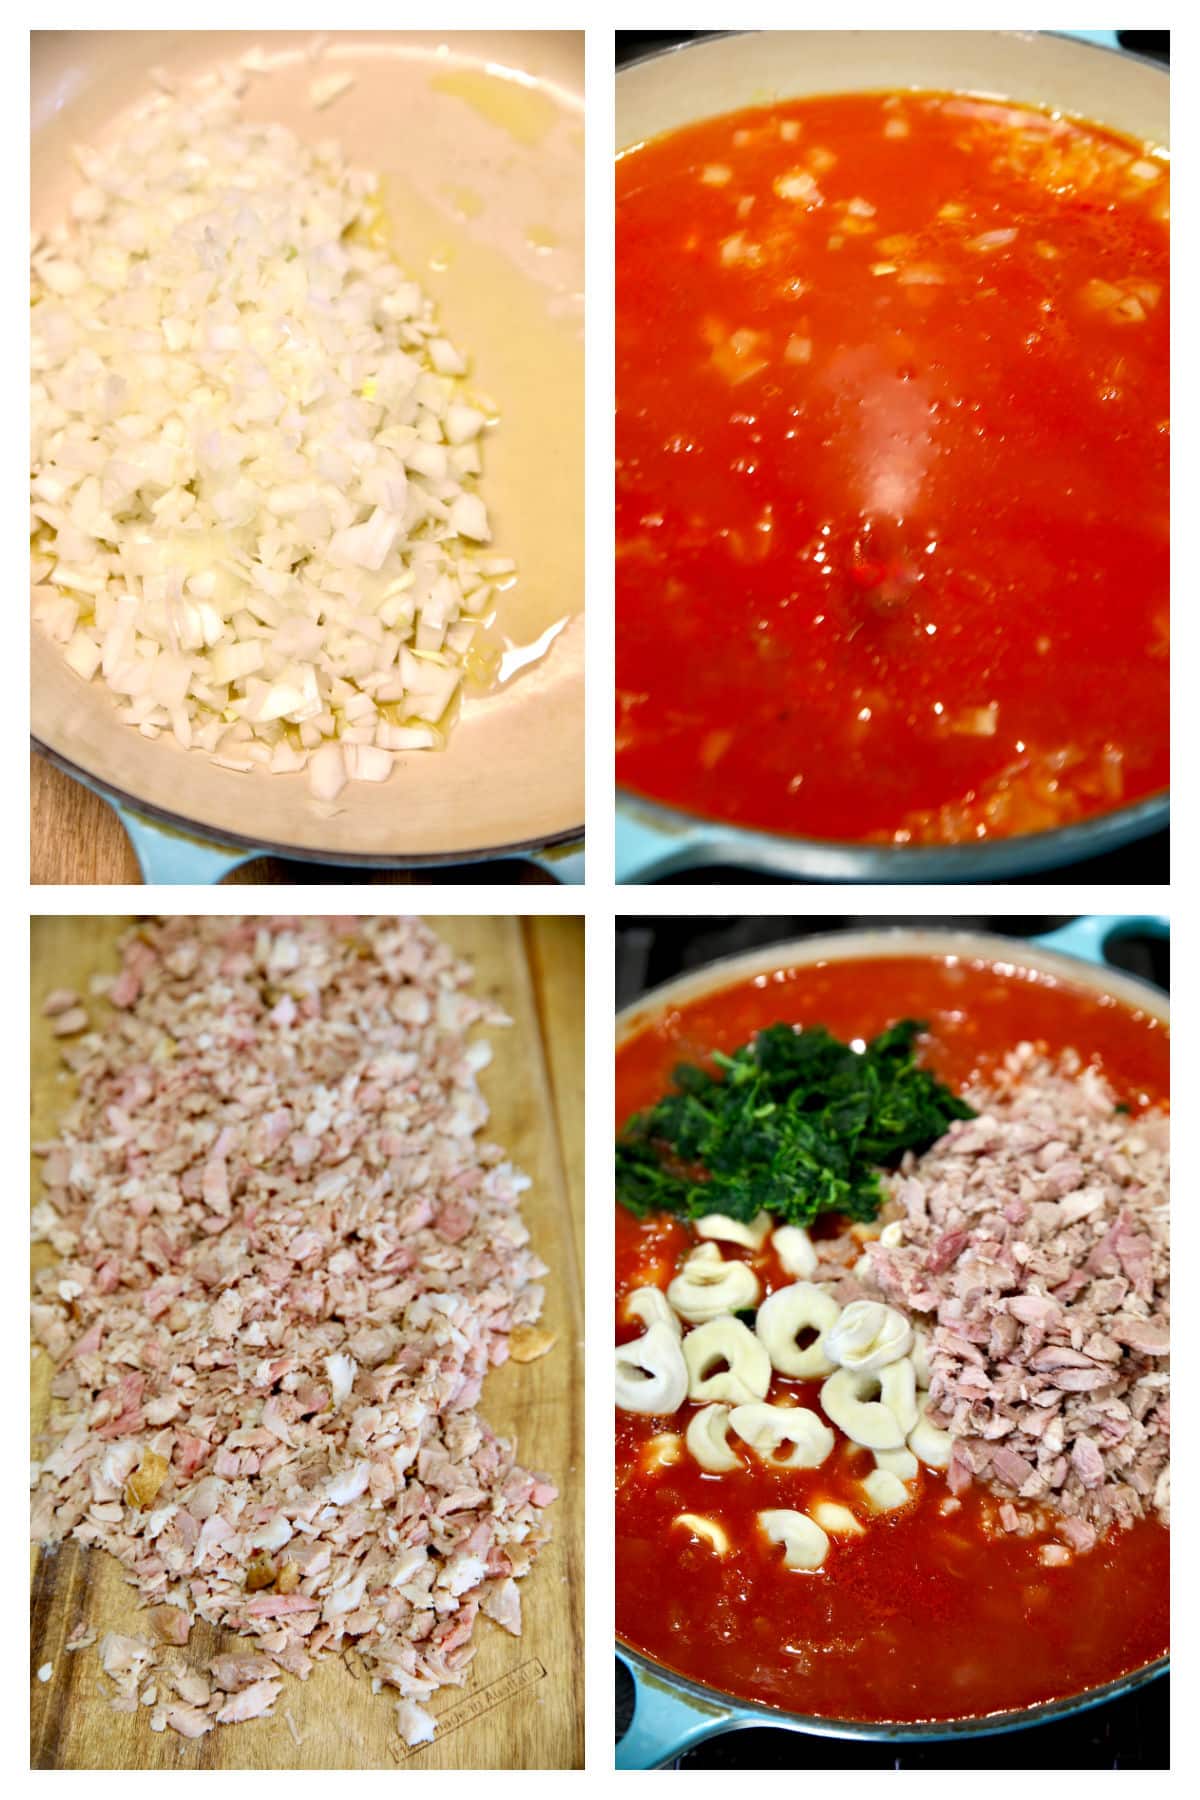 Collage of cooking onions, adding tomato sauce, chopped chicken, tortellini, spinach.